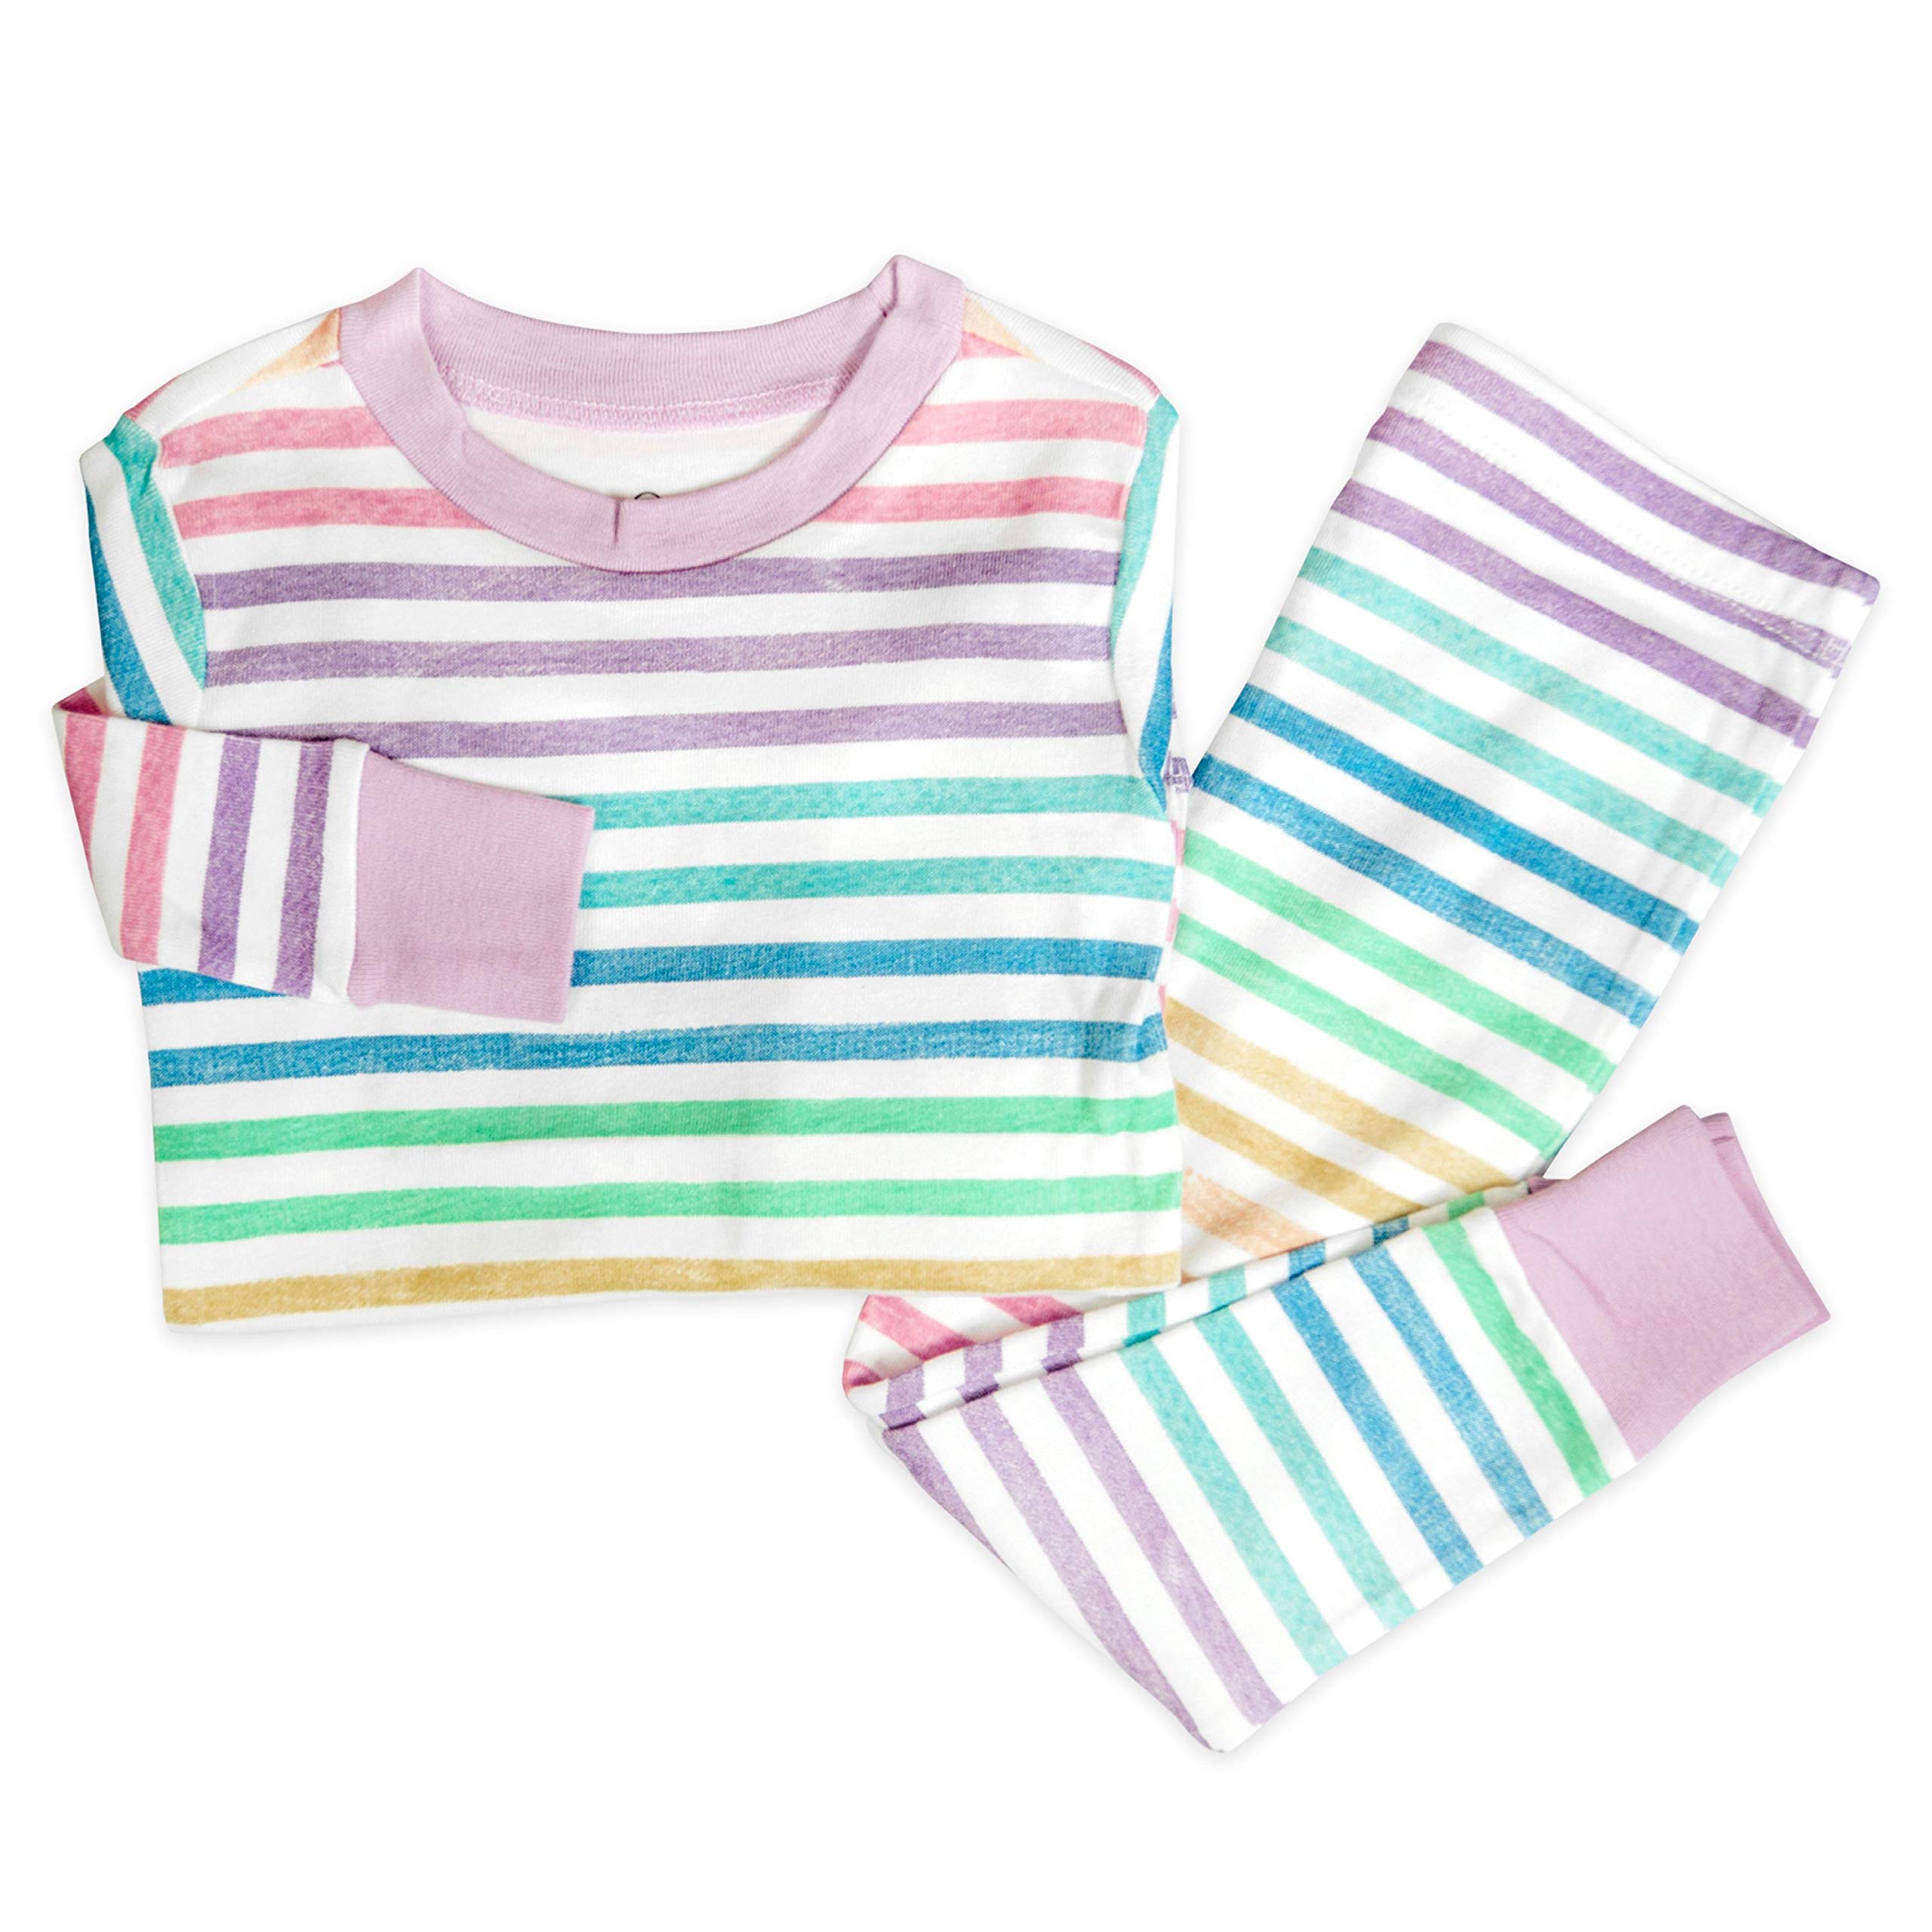 HonestBaby Multipack 2-Piece Pajamas Sleepwear PJs 100% Organic Cotton for Infant Baby and Toddler Girls, Rainbow Stripe, 24 Months